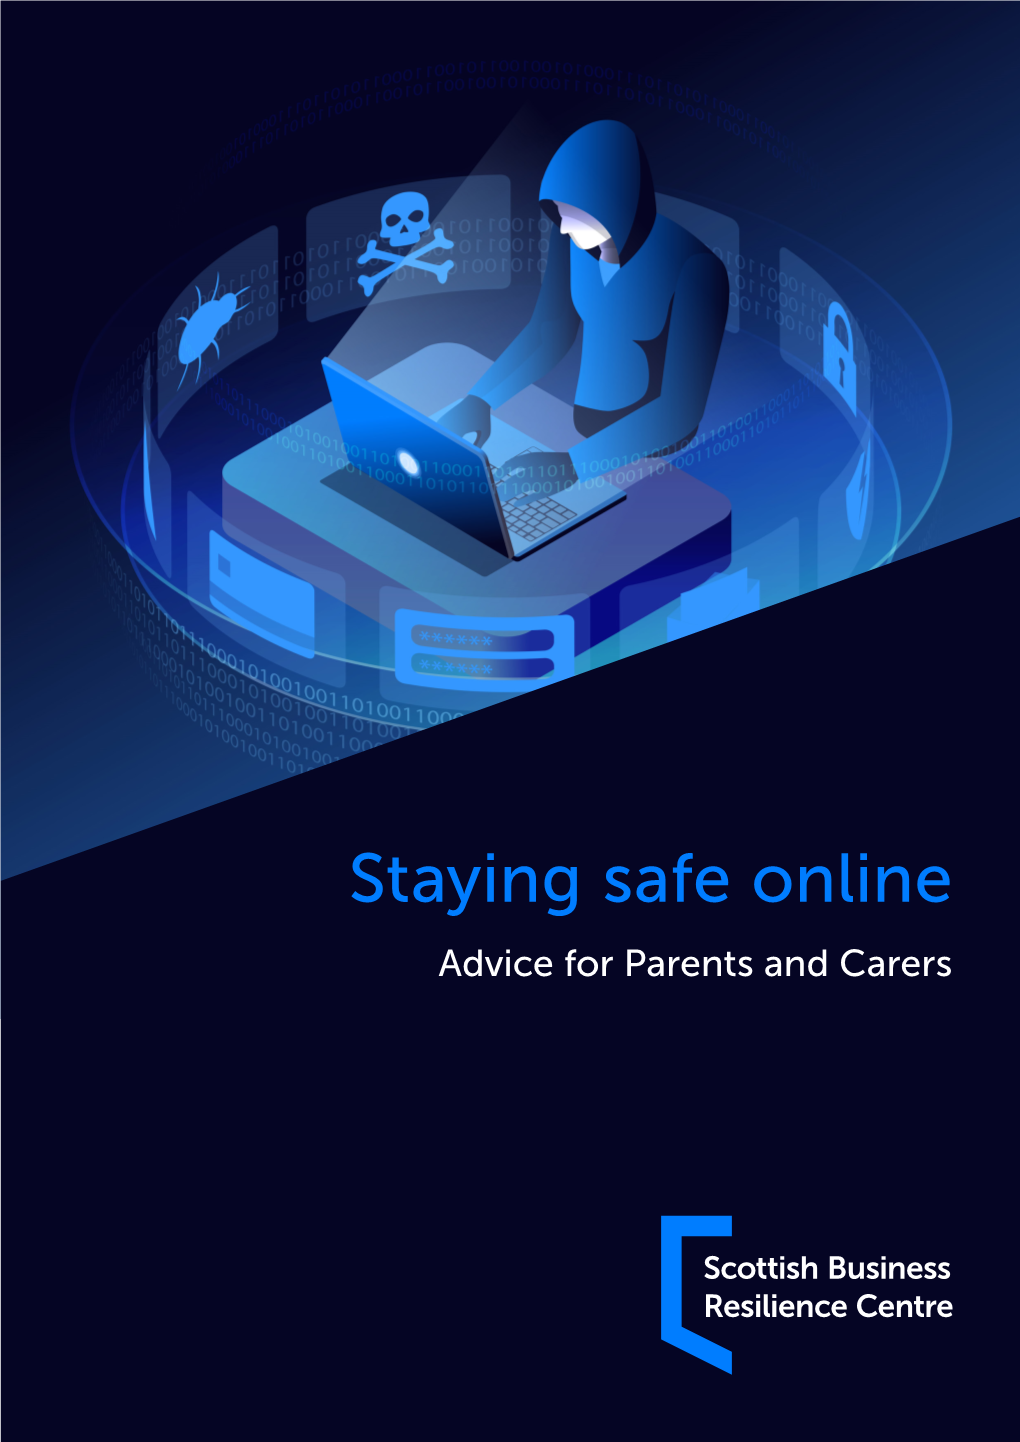 Staying Safe Online Advice for Parents and Carers the SCOTTISH BUSINESS RESILIENCE CENTRE STAYING SAFE ONLINE: ADVICE for PARENTS and CARERS Safety Guide